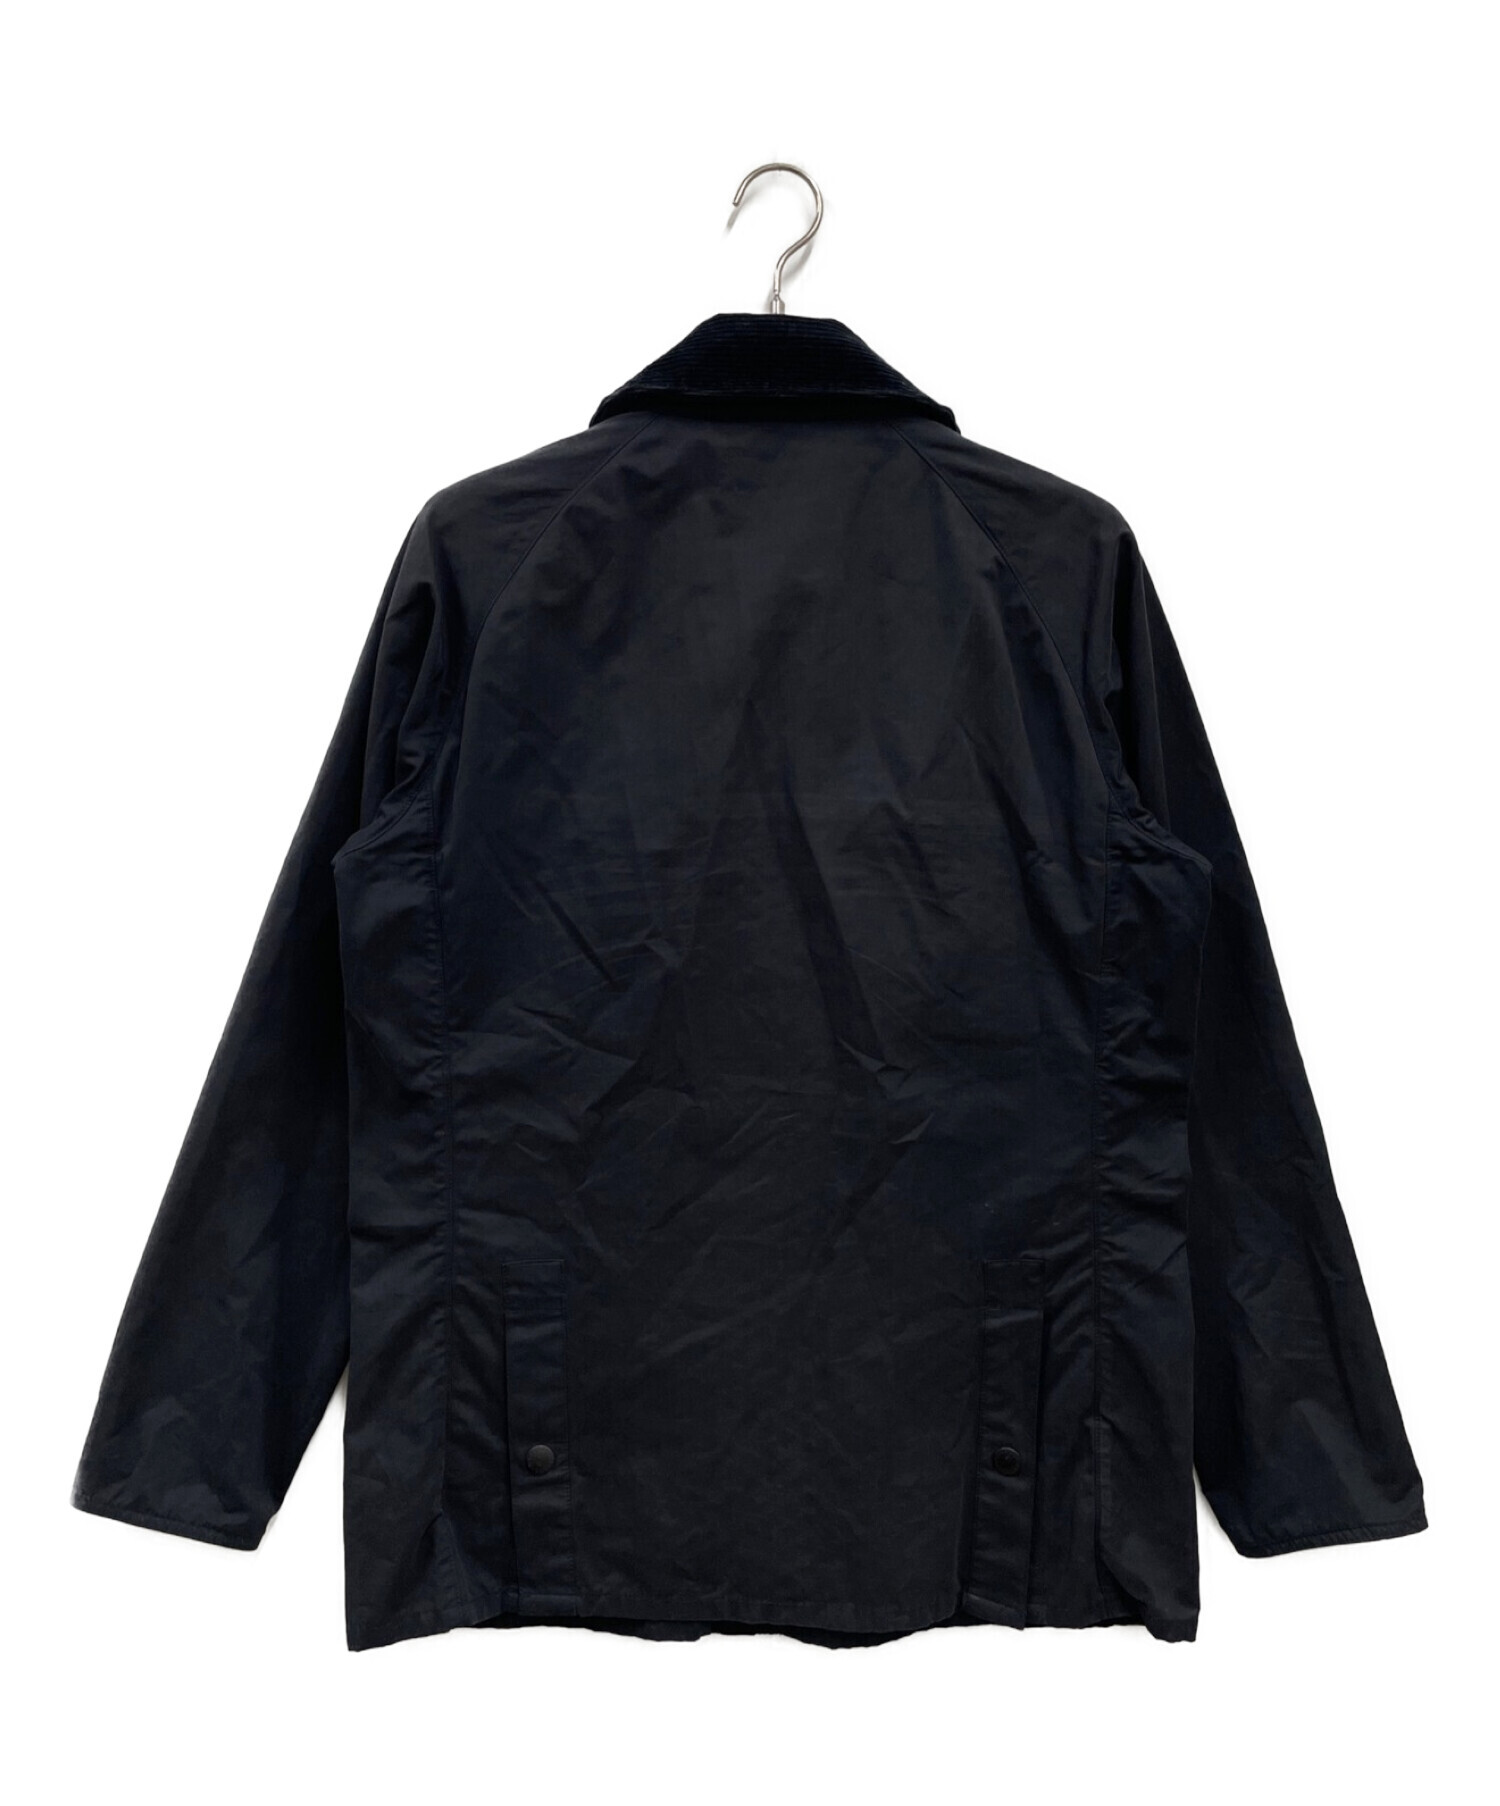 Barbour (バブアー) BEDALE SL PEACHED ブラック サイズ:40